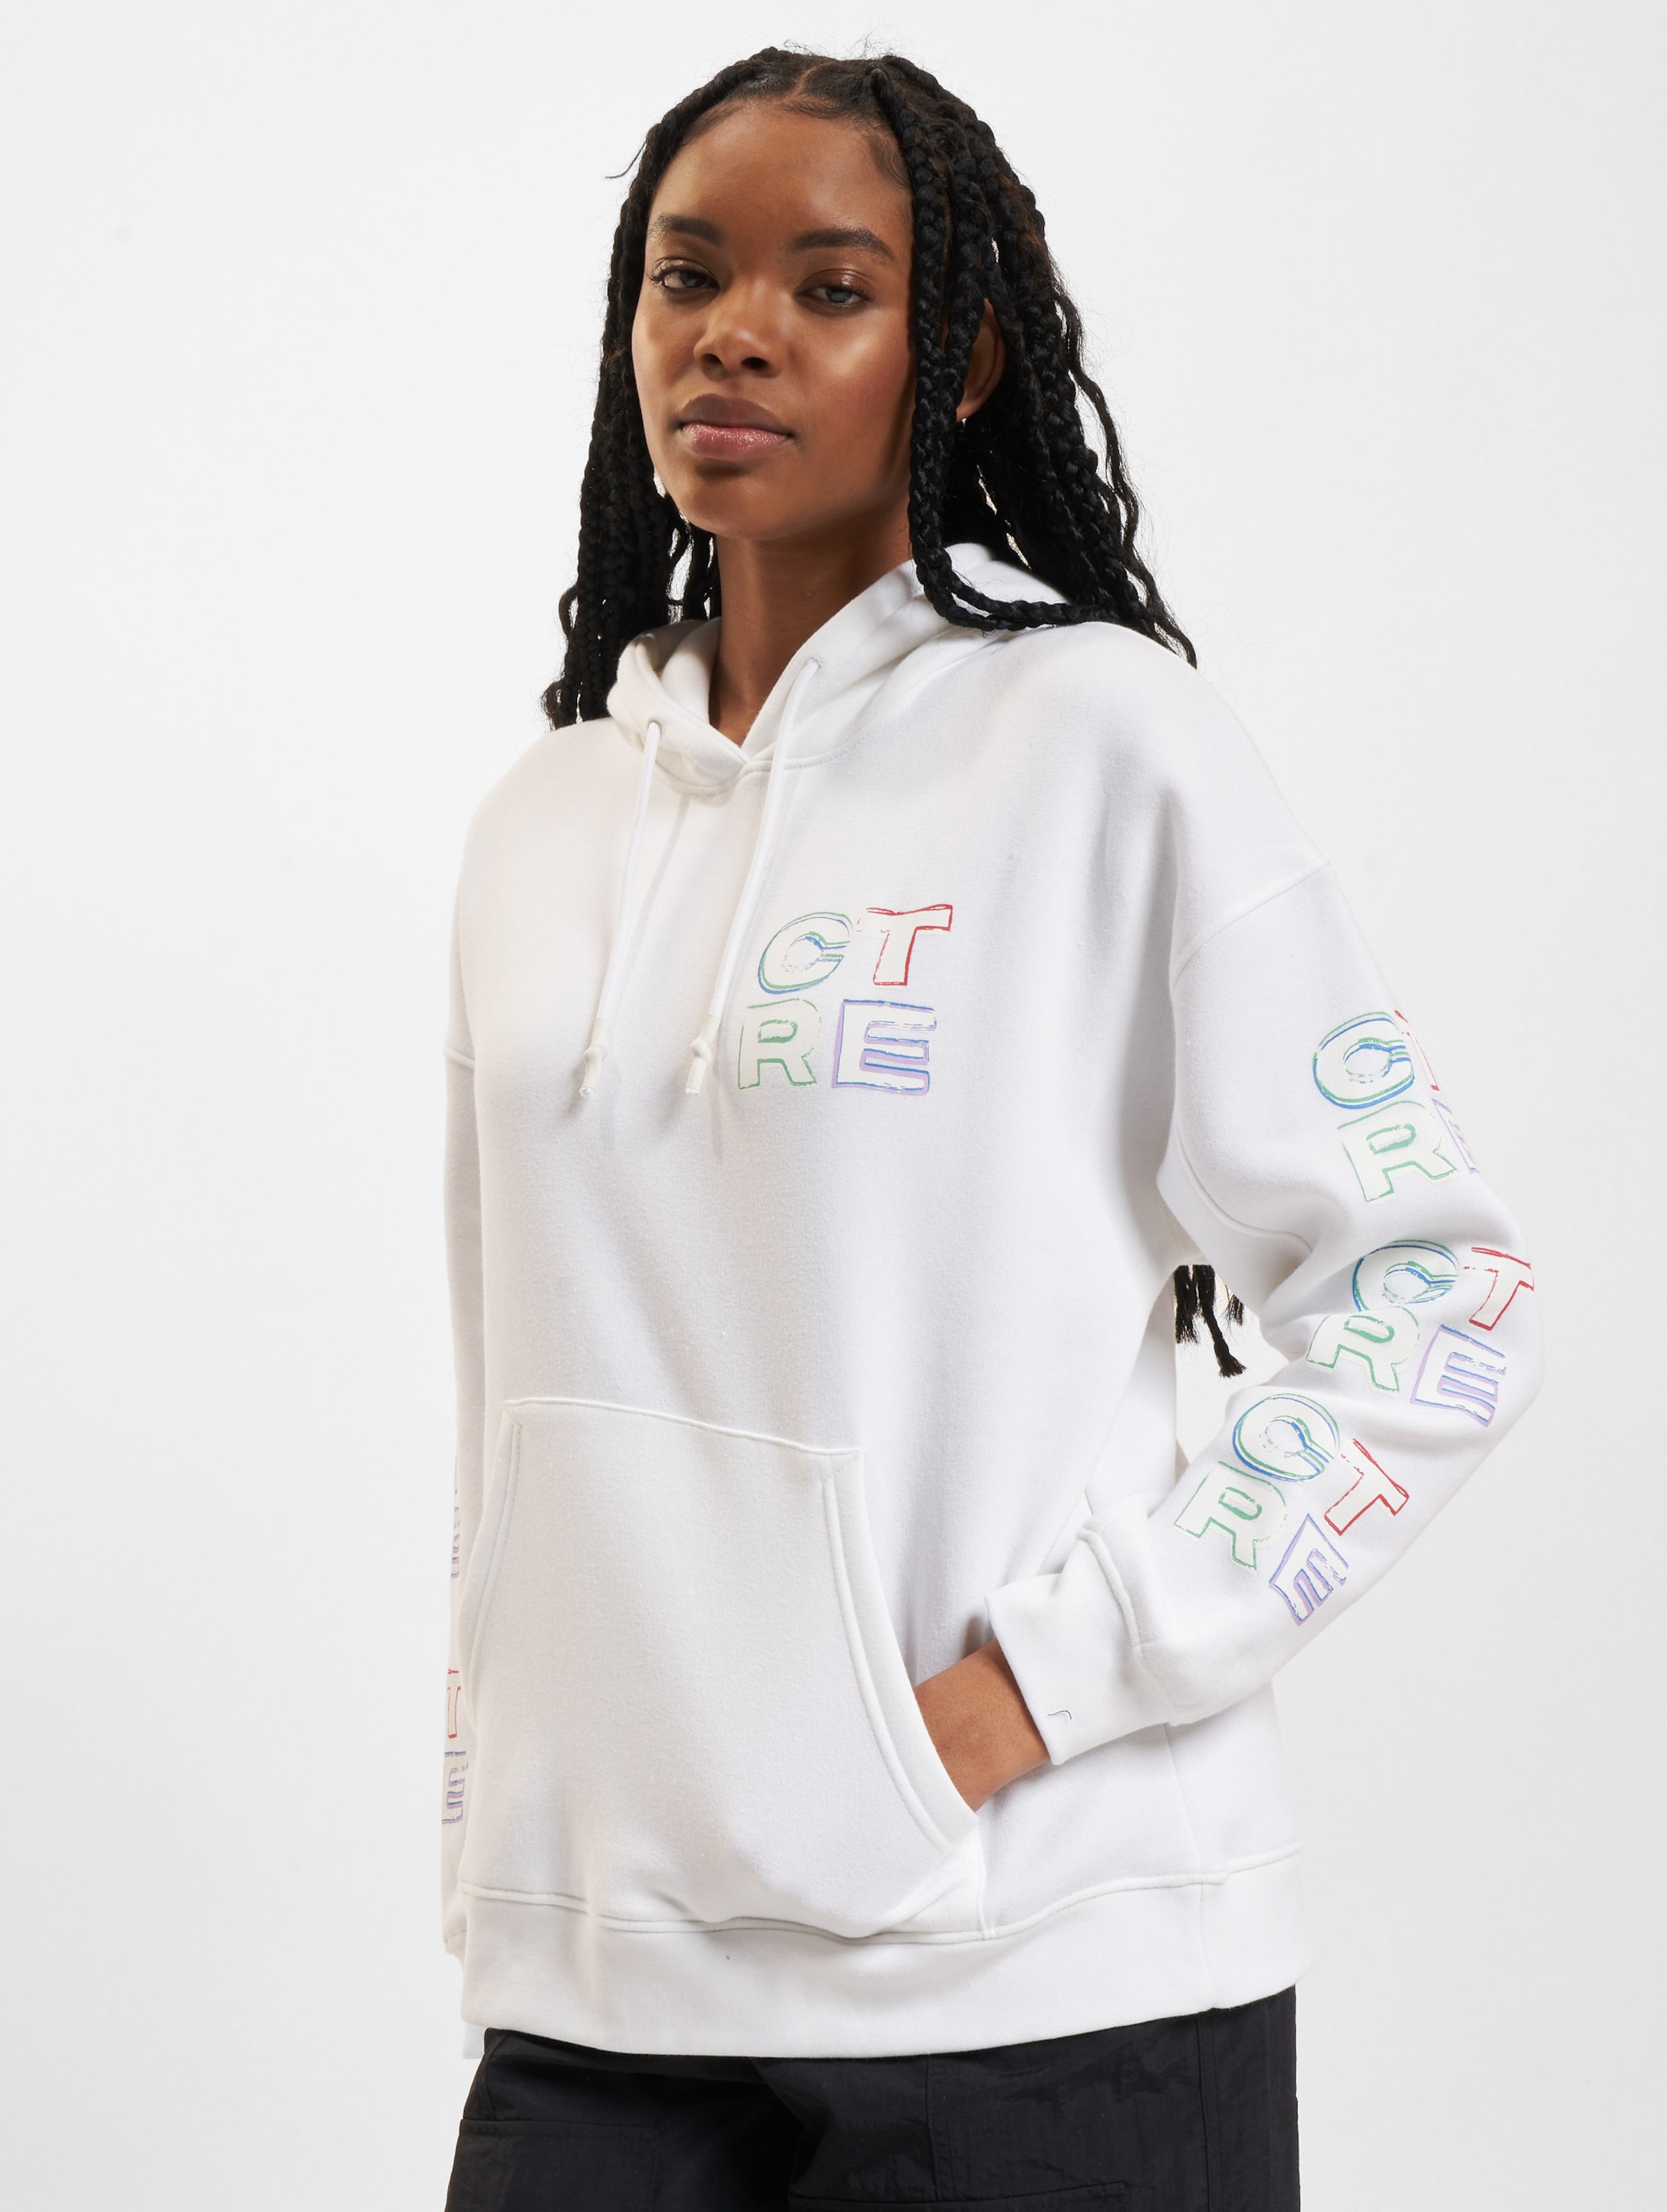 The Couture Club Multi Coloured Graphic Oversized Hoodie Vrouwen op kleur wit, Maat L